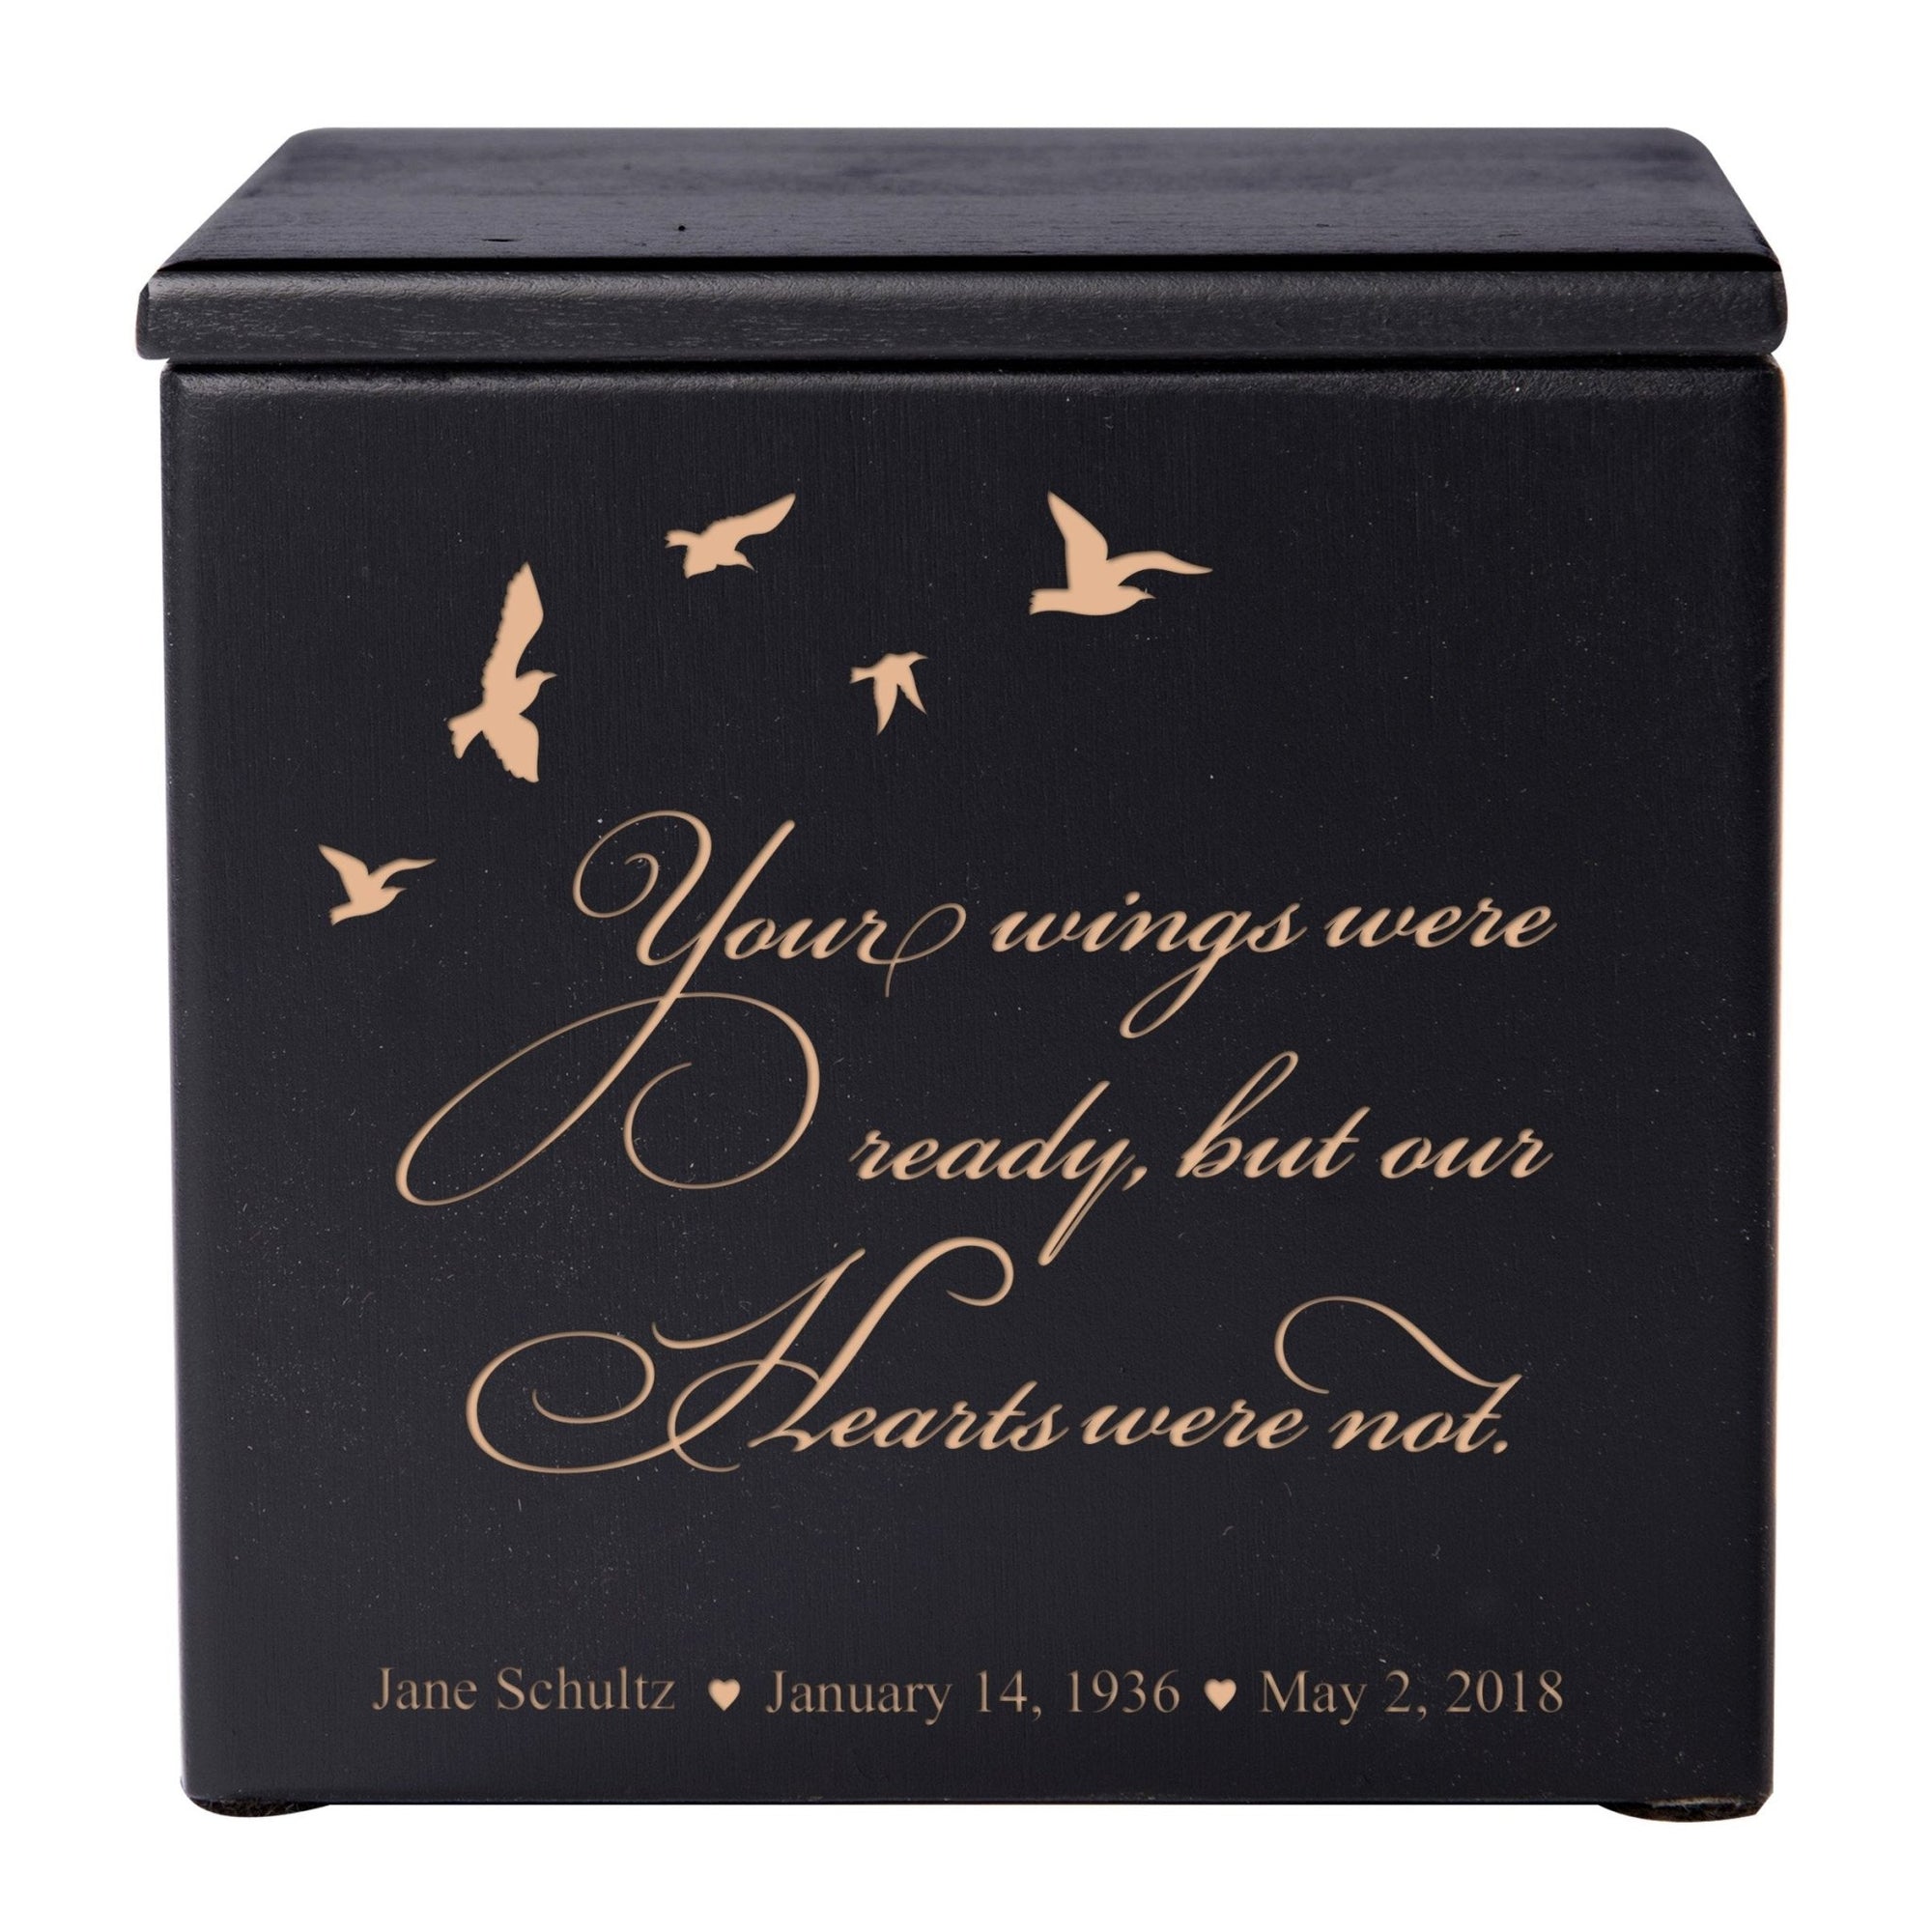 Custom Wooden Cremation Urn Box Your Wings Were Ready holds 17 cu in of Human Ashes - LifeSong Milestones